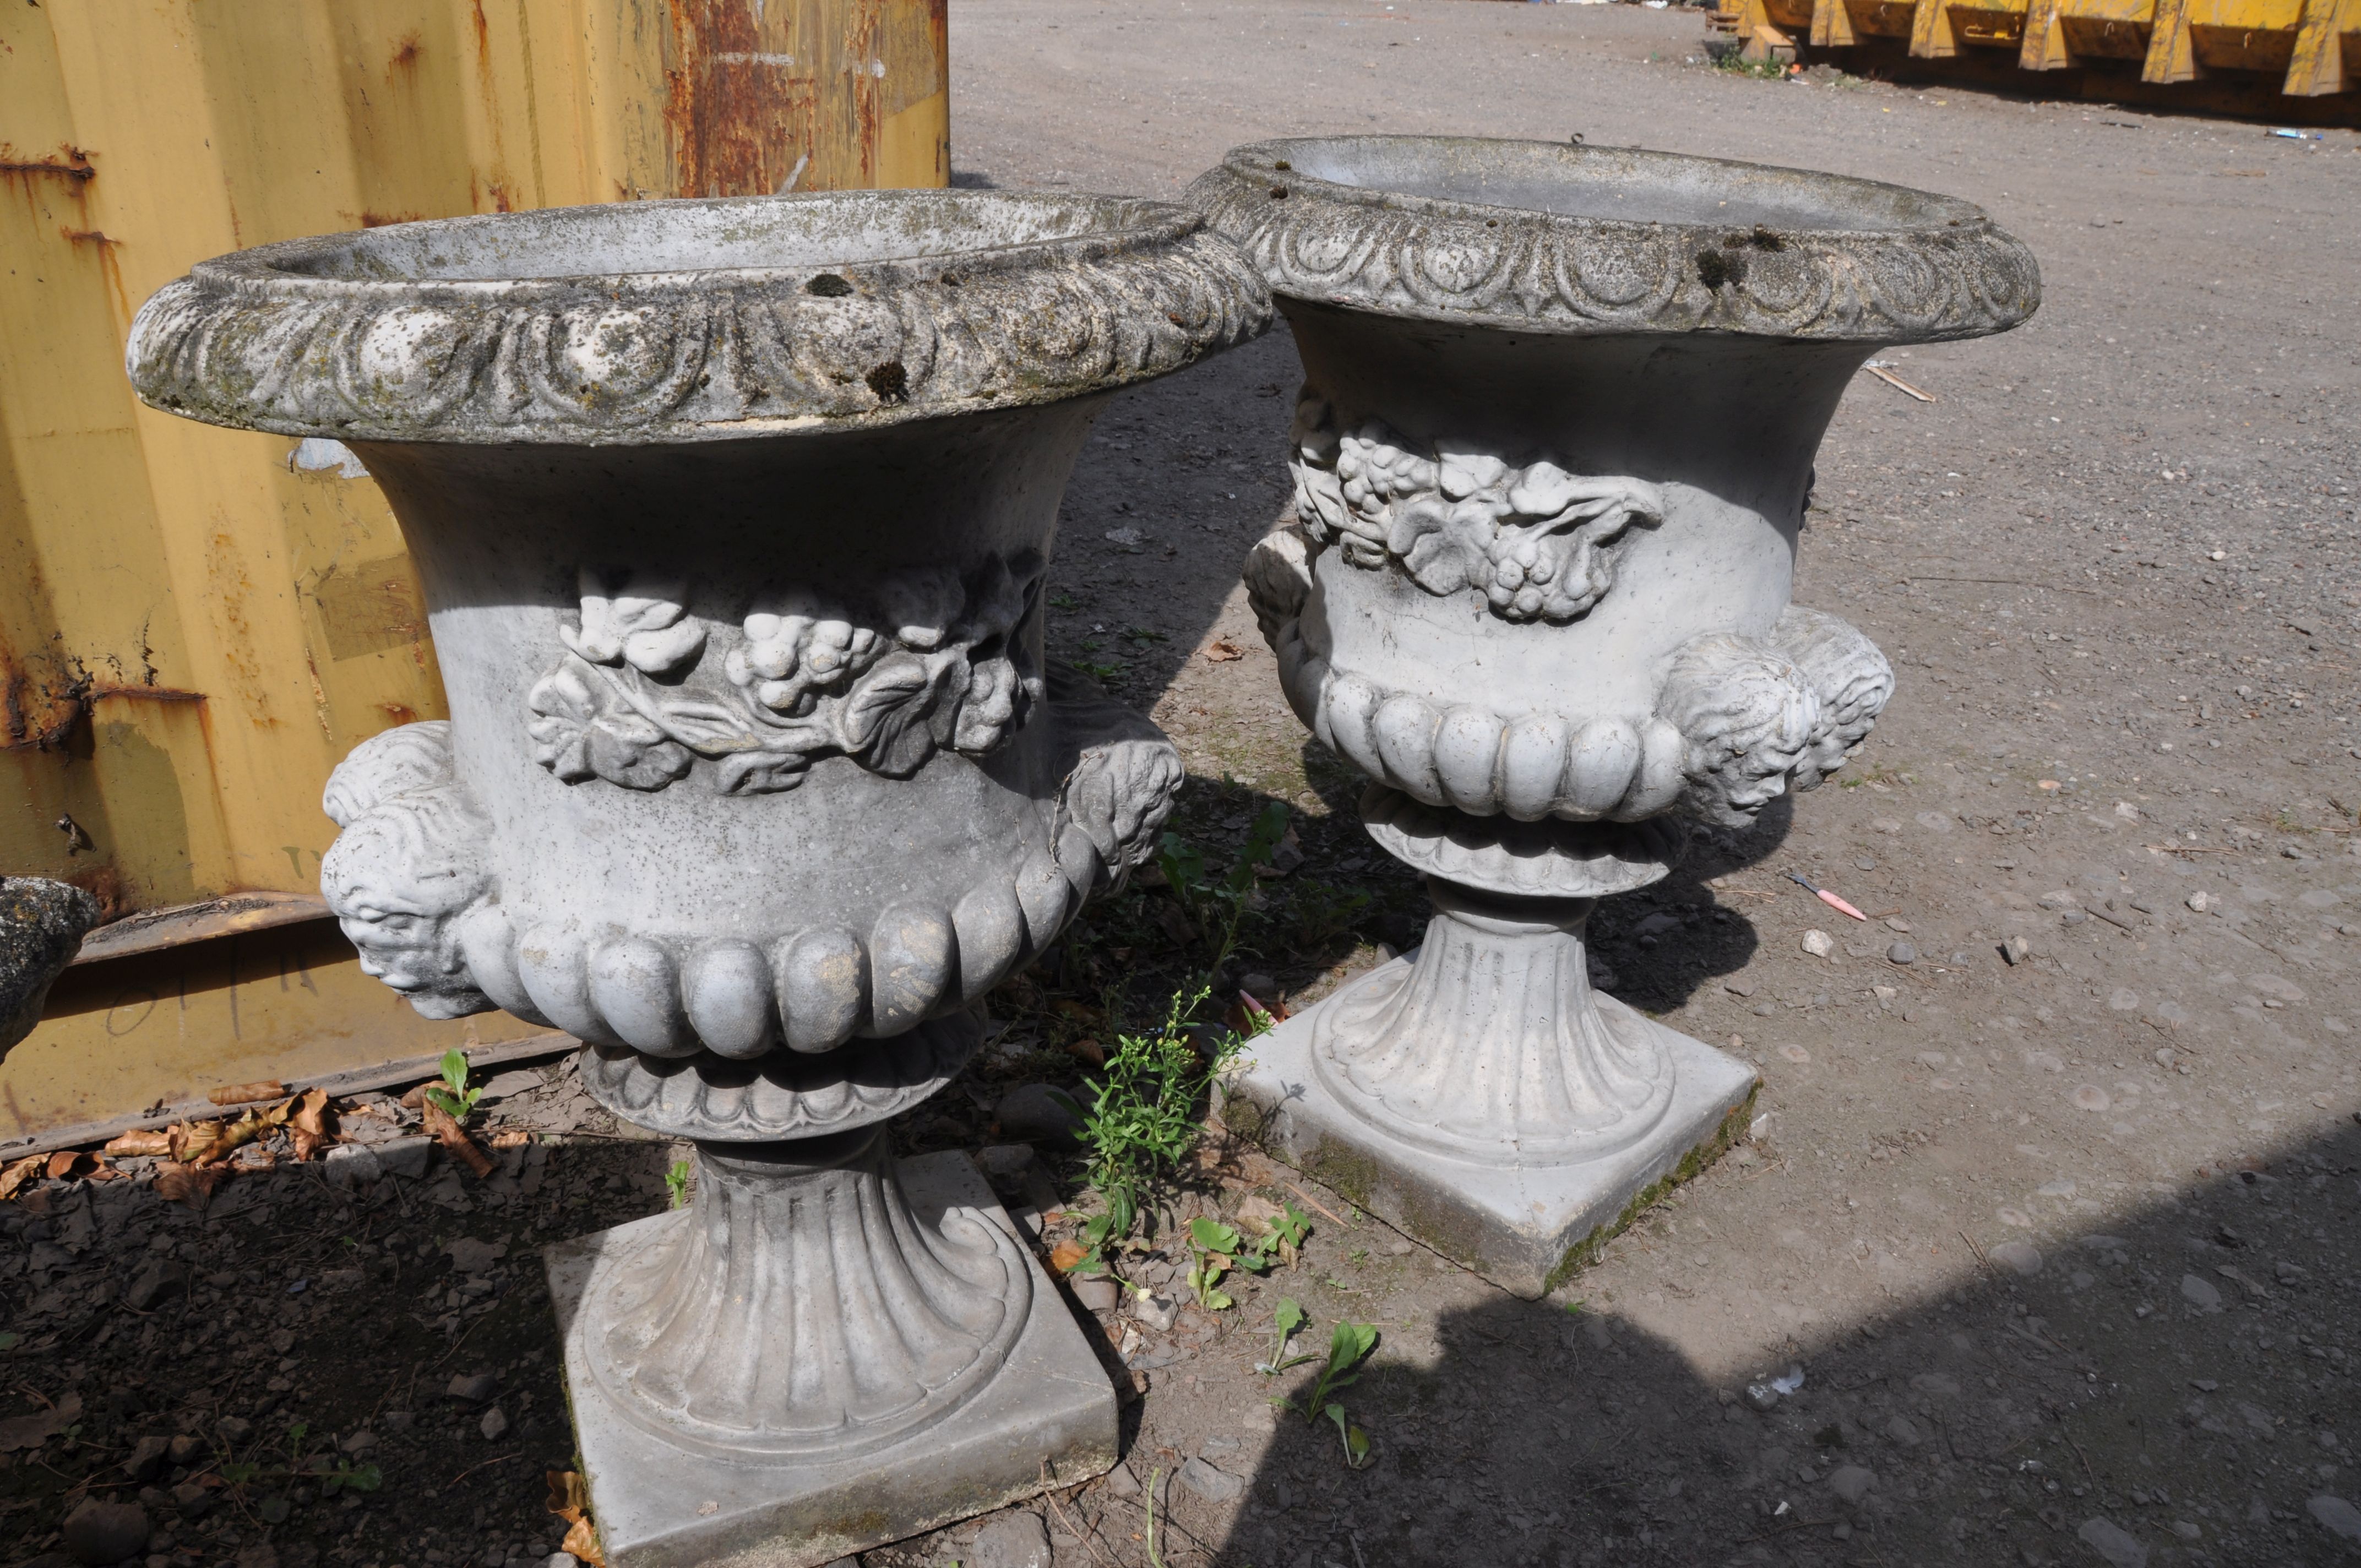 A PAIR OF MODERN COMPOSITE GARDEN URNS one piece in construction with dual mask motifs on opposing - Image 2 of 3